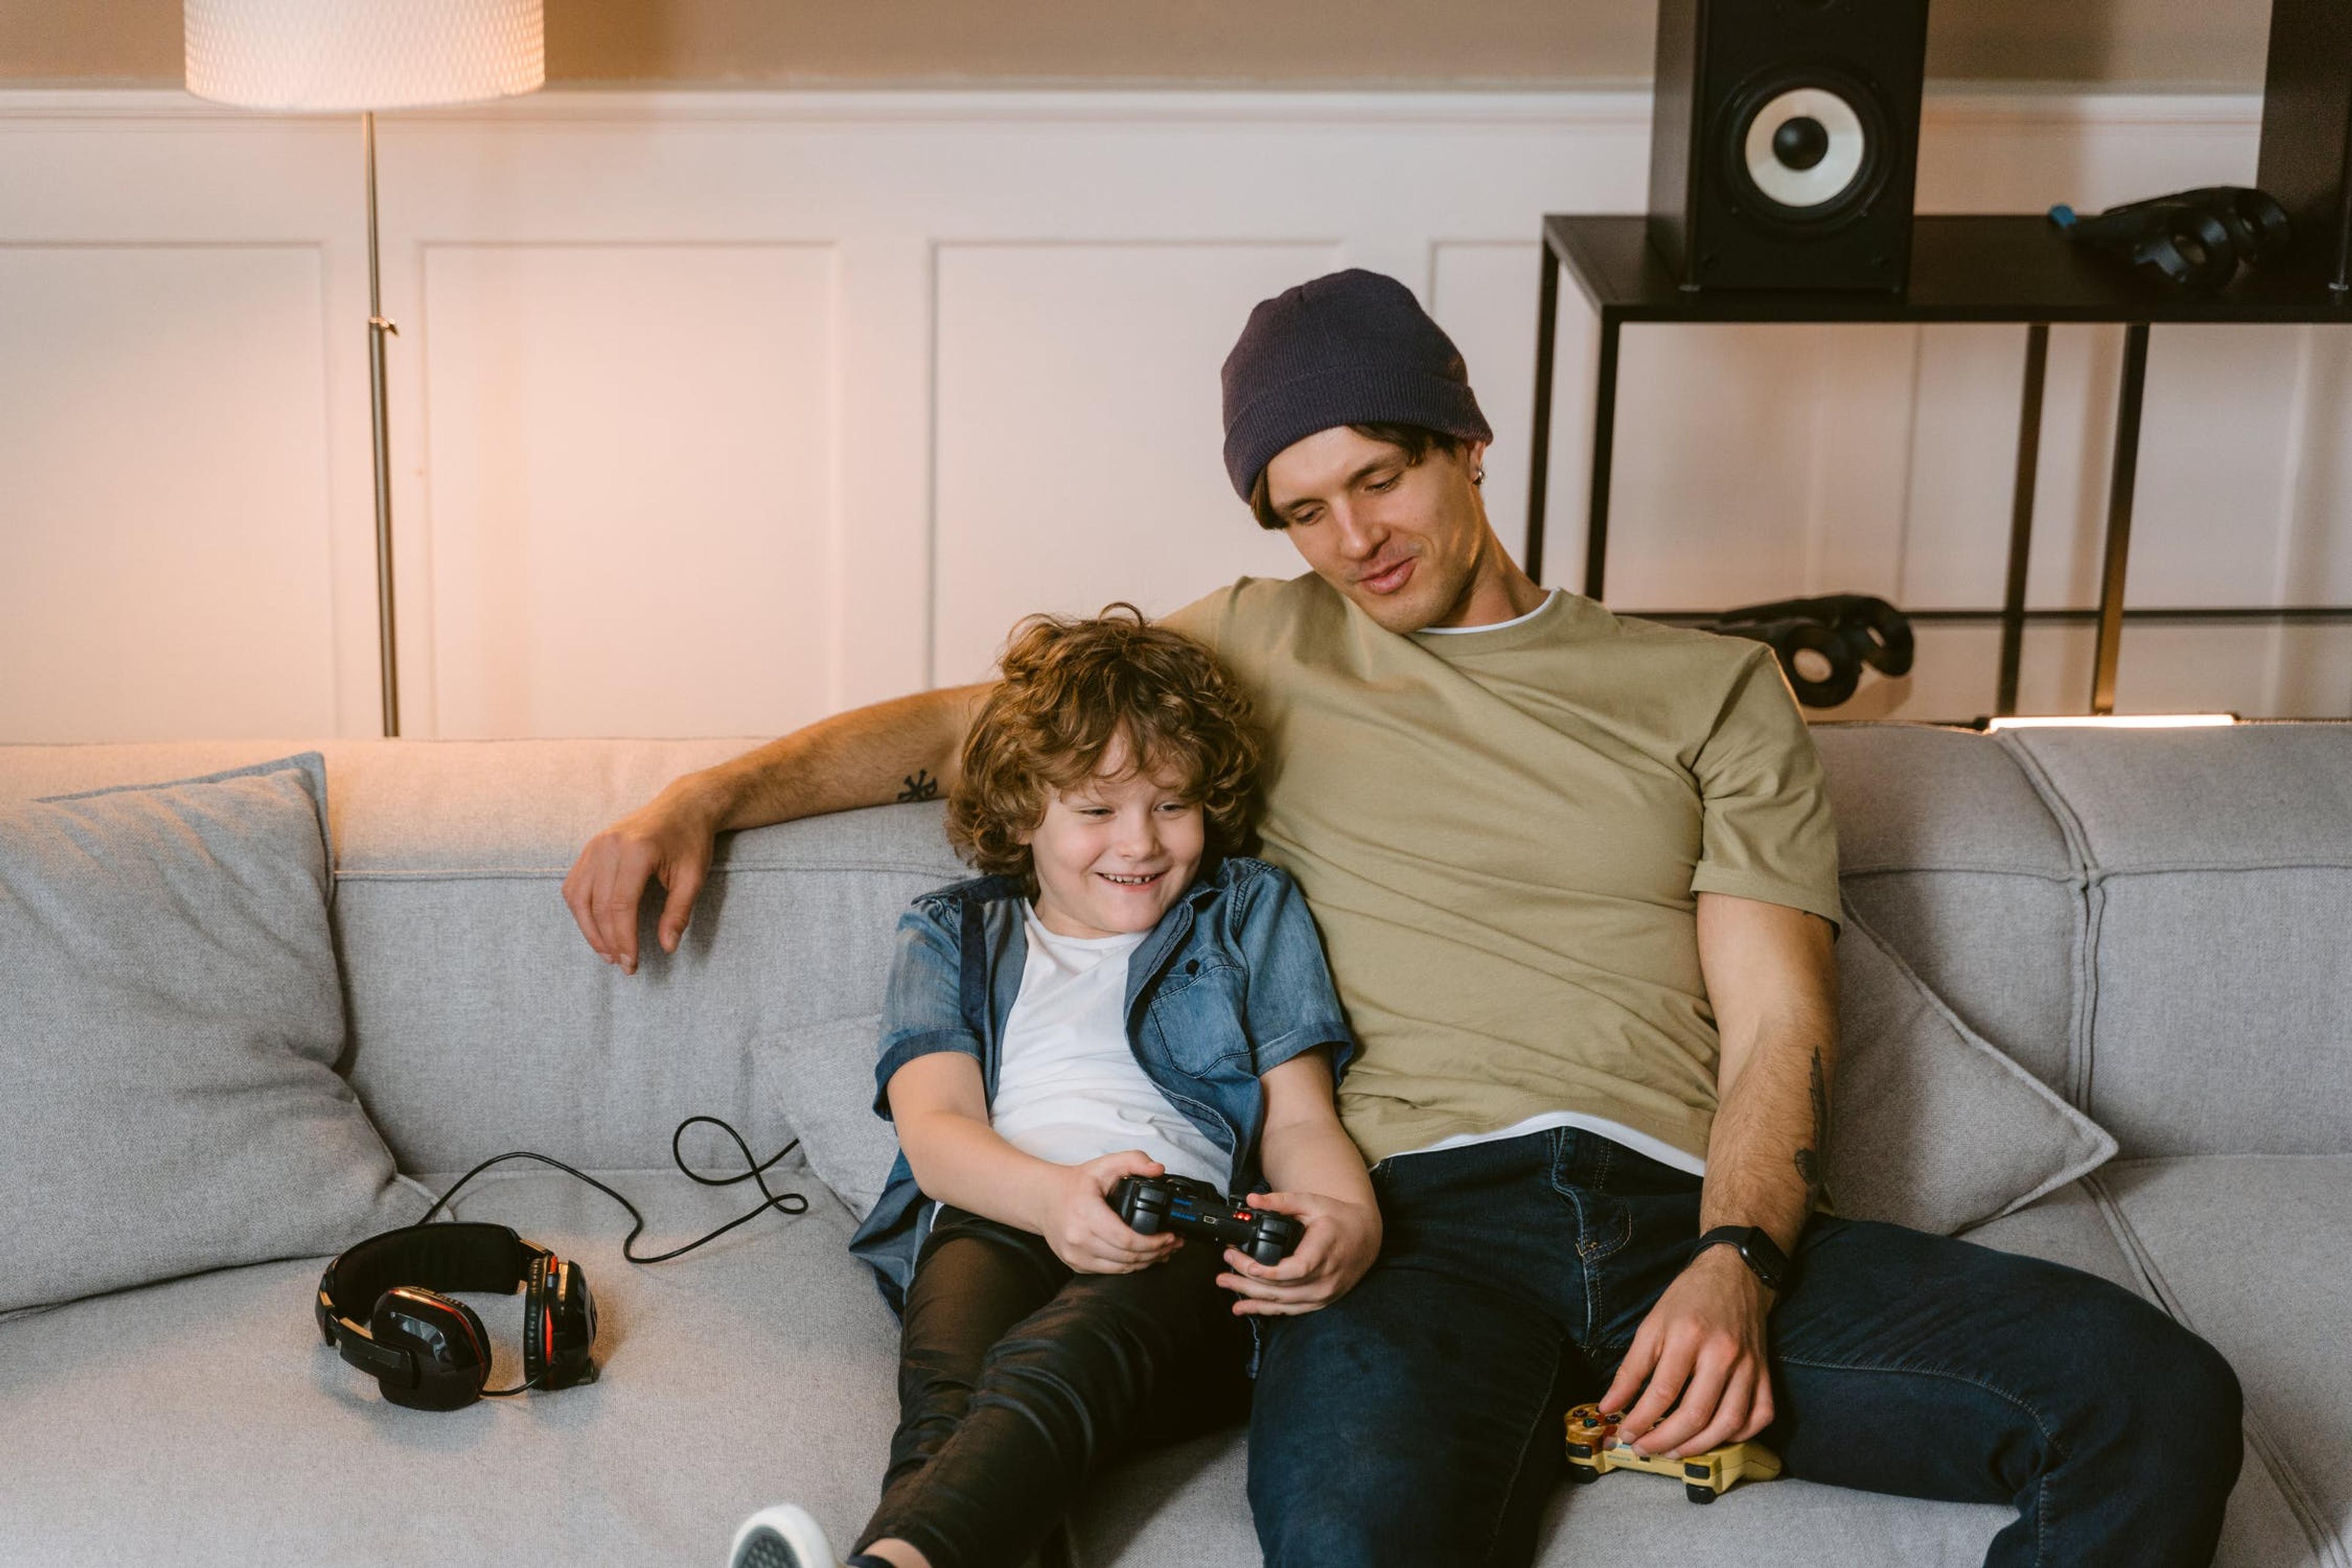 A father and son sit on a couch together playing video games